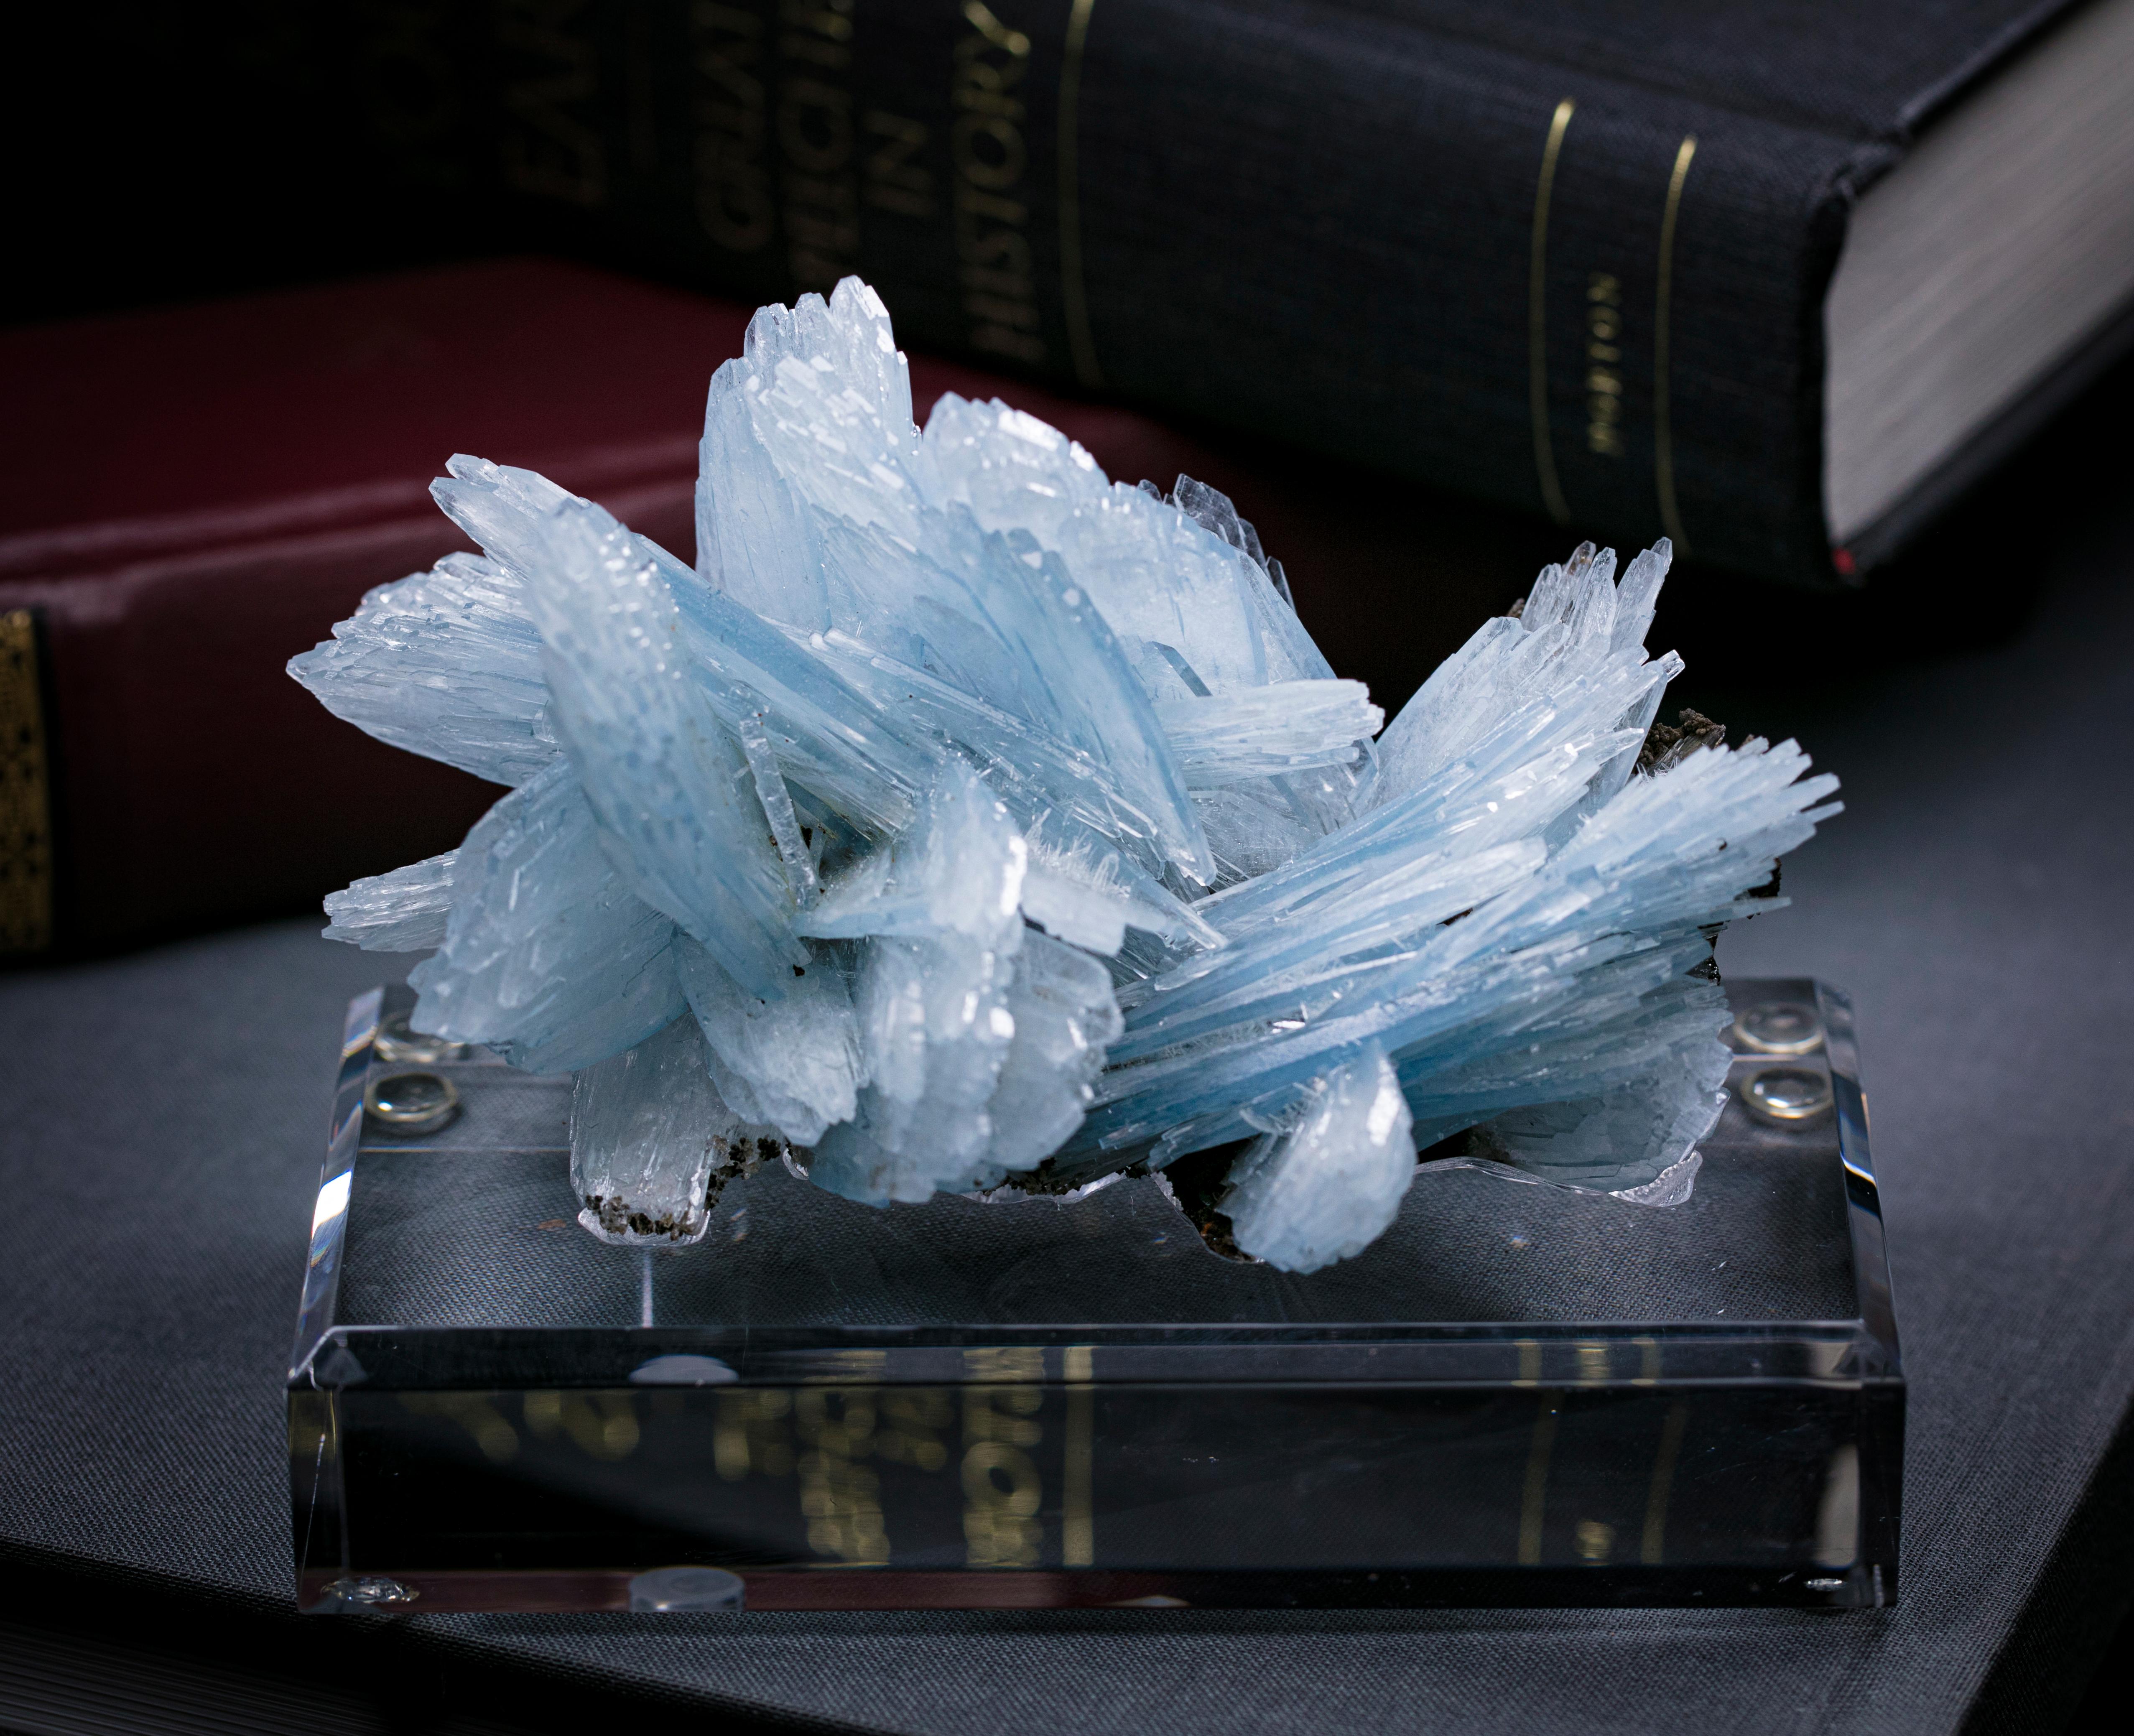 Barite is made up of barium sulfate (BaSO4) and is the primary ore of barium. Although found in multiple places on Earth, its colors and forms vary significantly from deposit to deposit. This lovely, sky-blue example comes from a one-time-find from